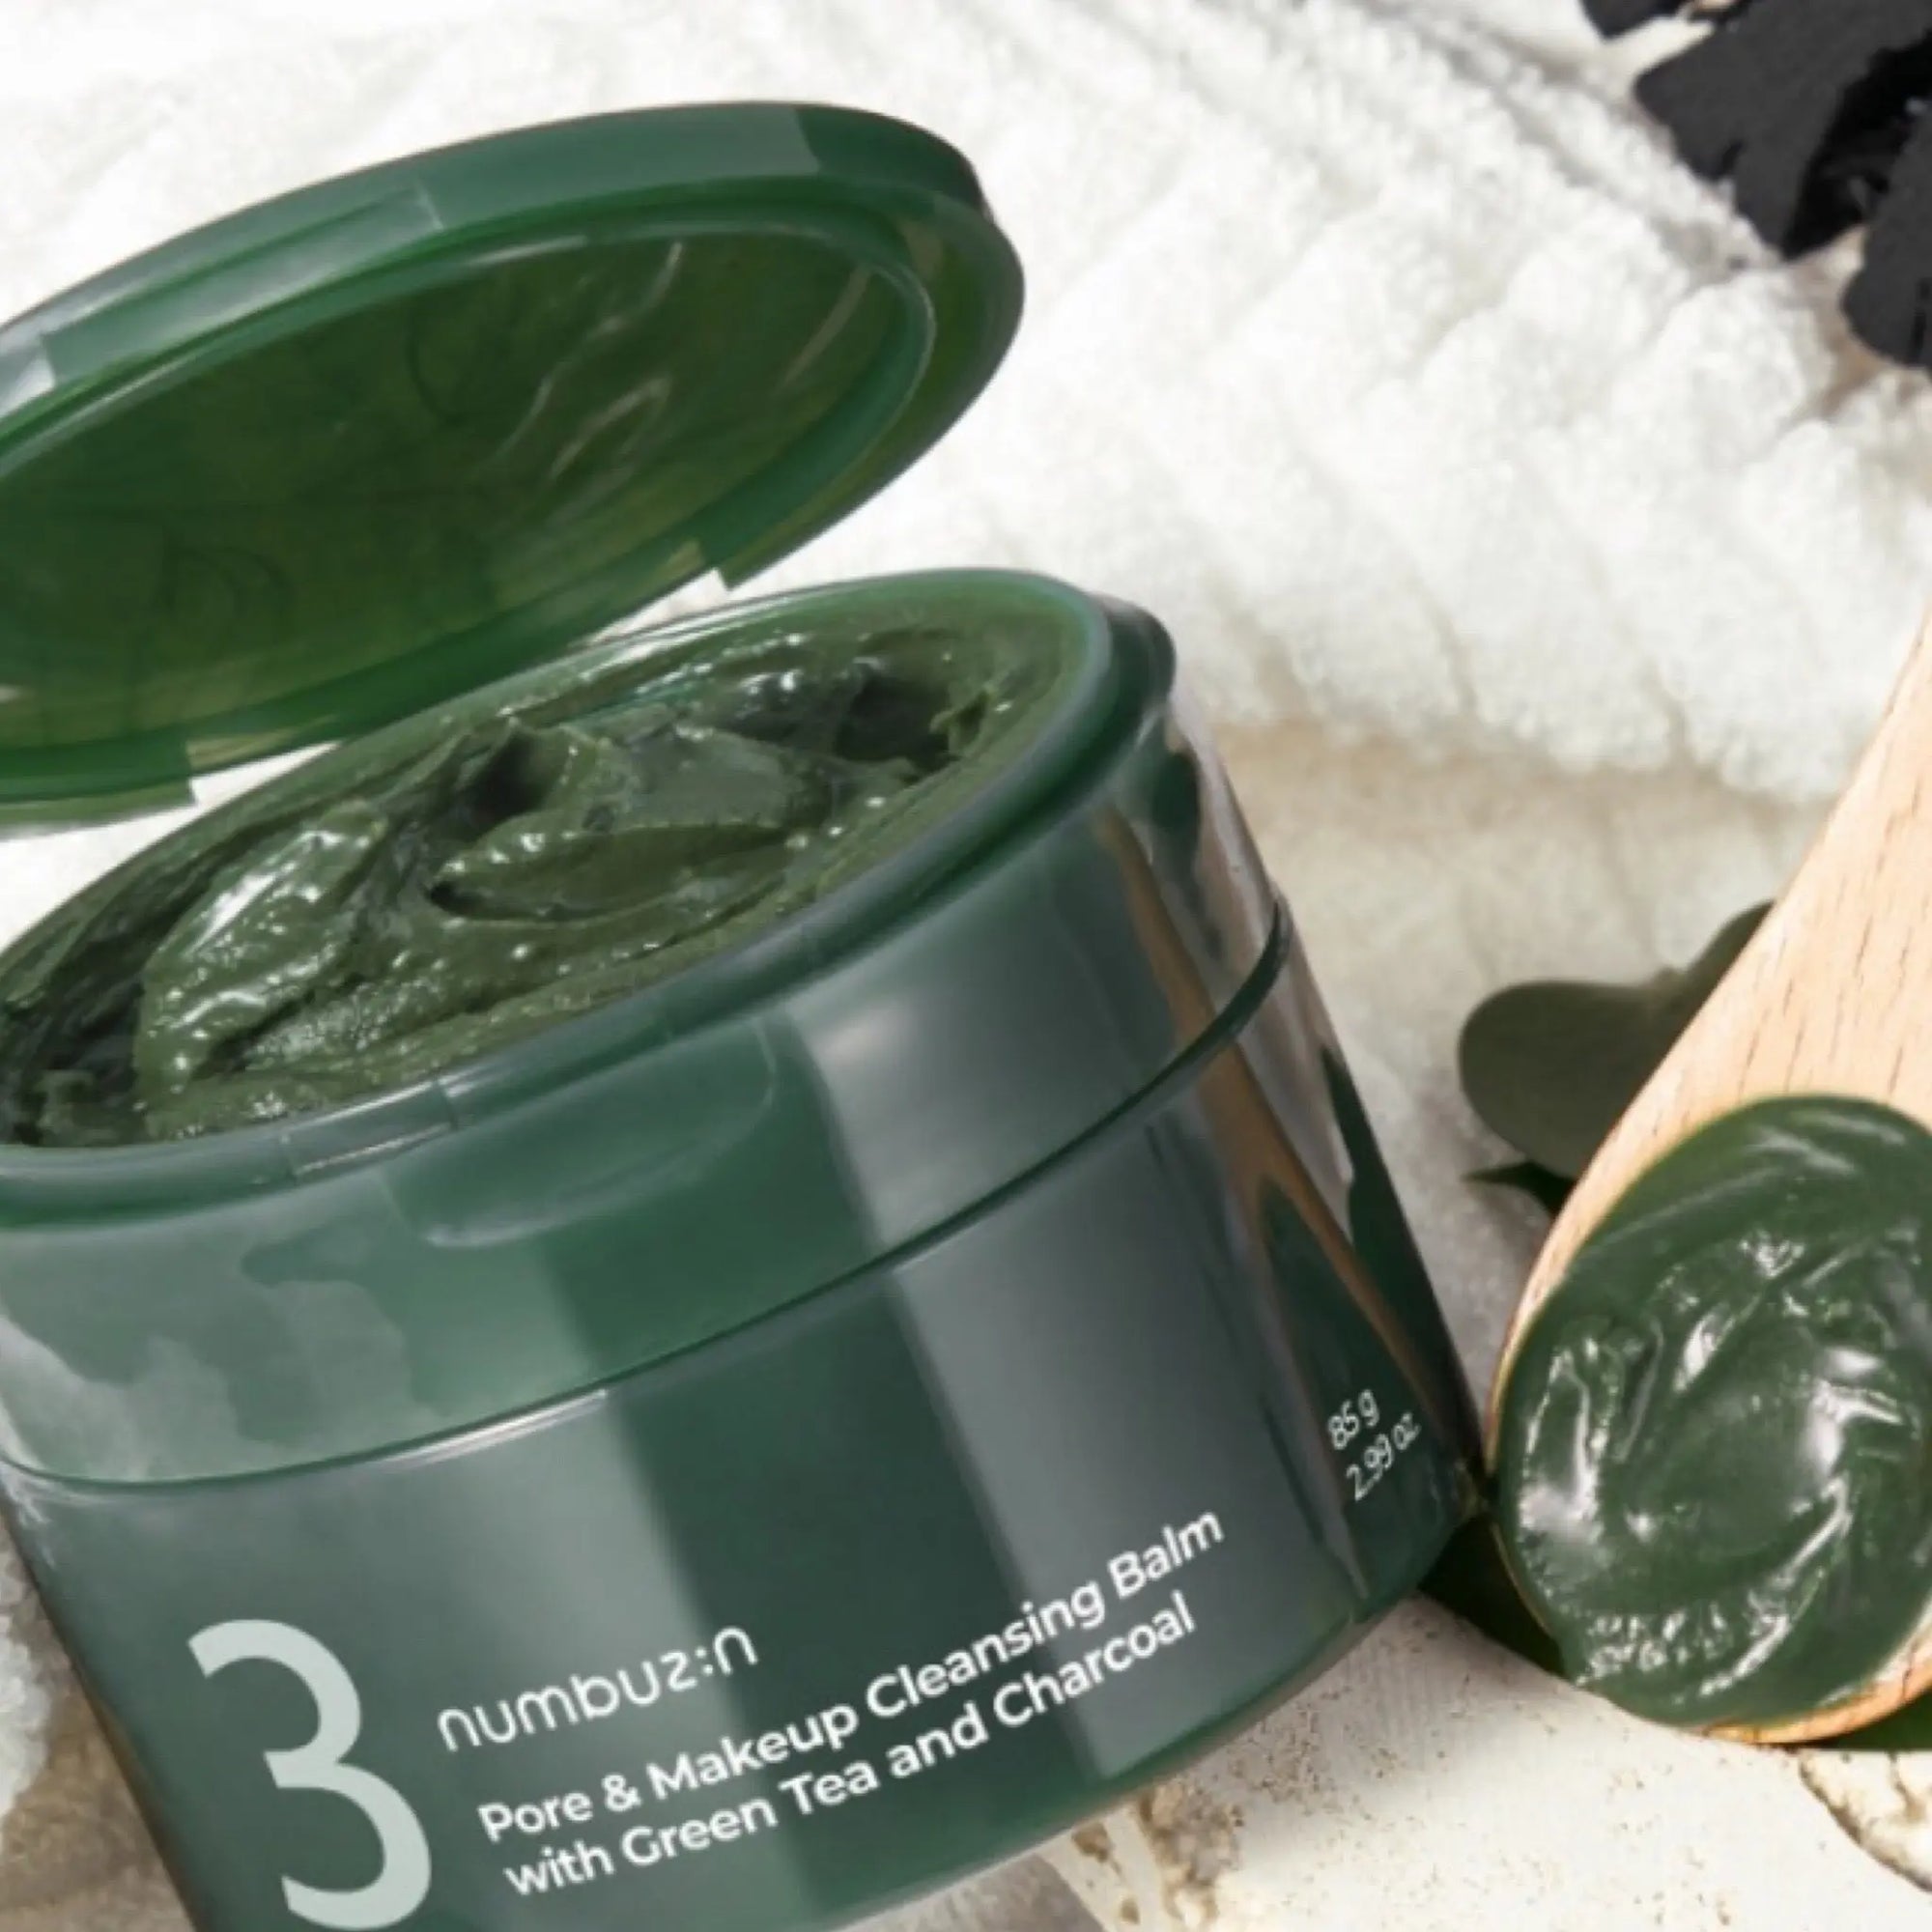 Numbuzin - No.3 Pore & Makeup Cleansing Balm with Green Tea and Charcoal 85g Numbuzin